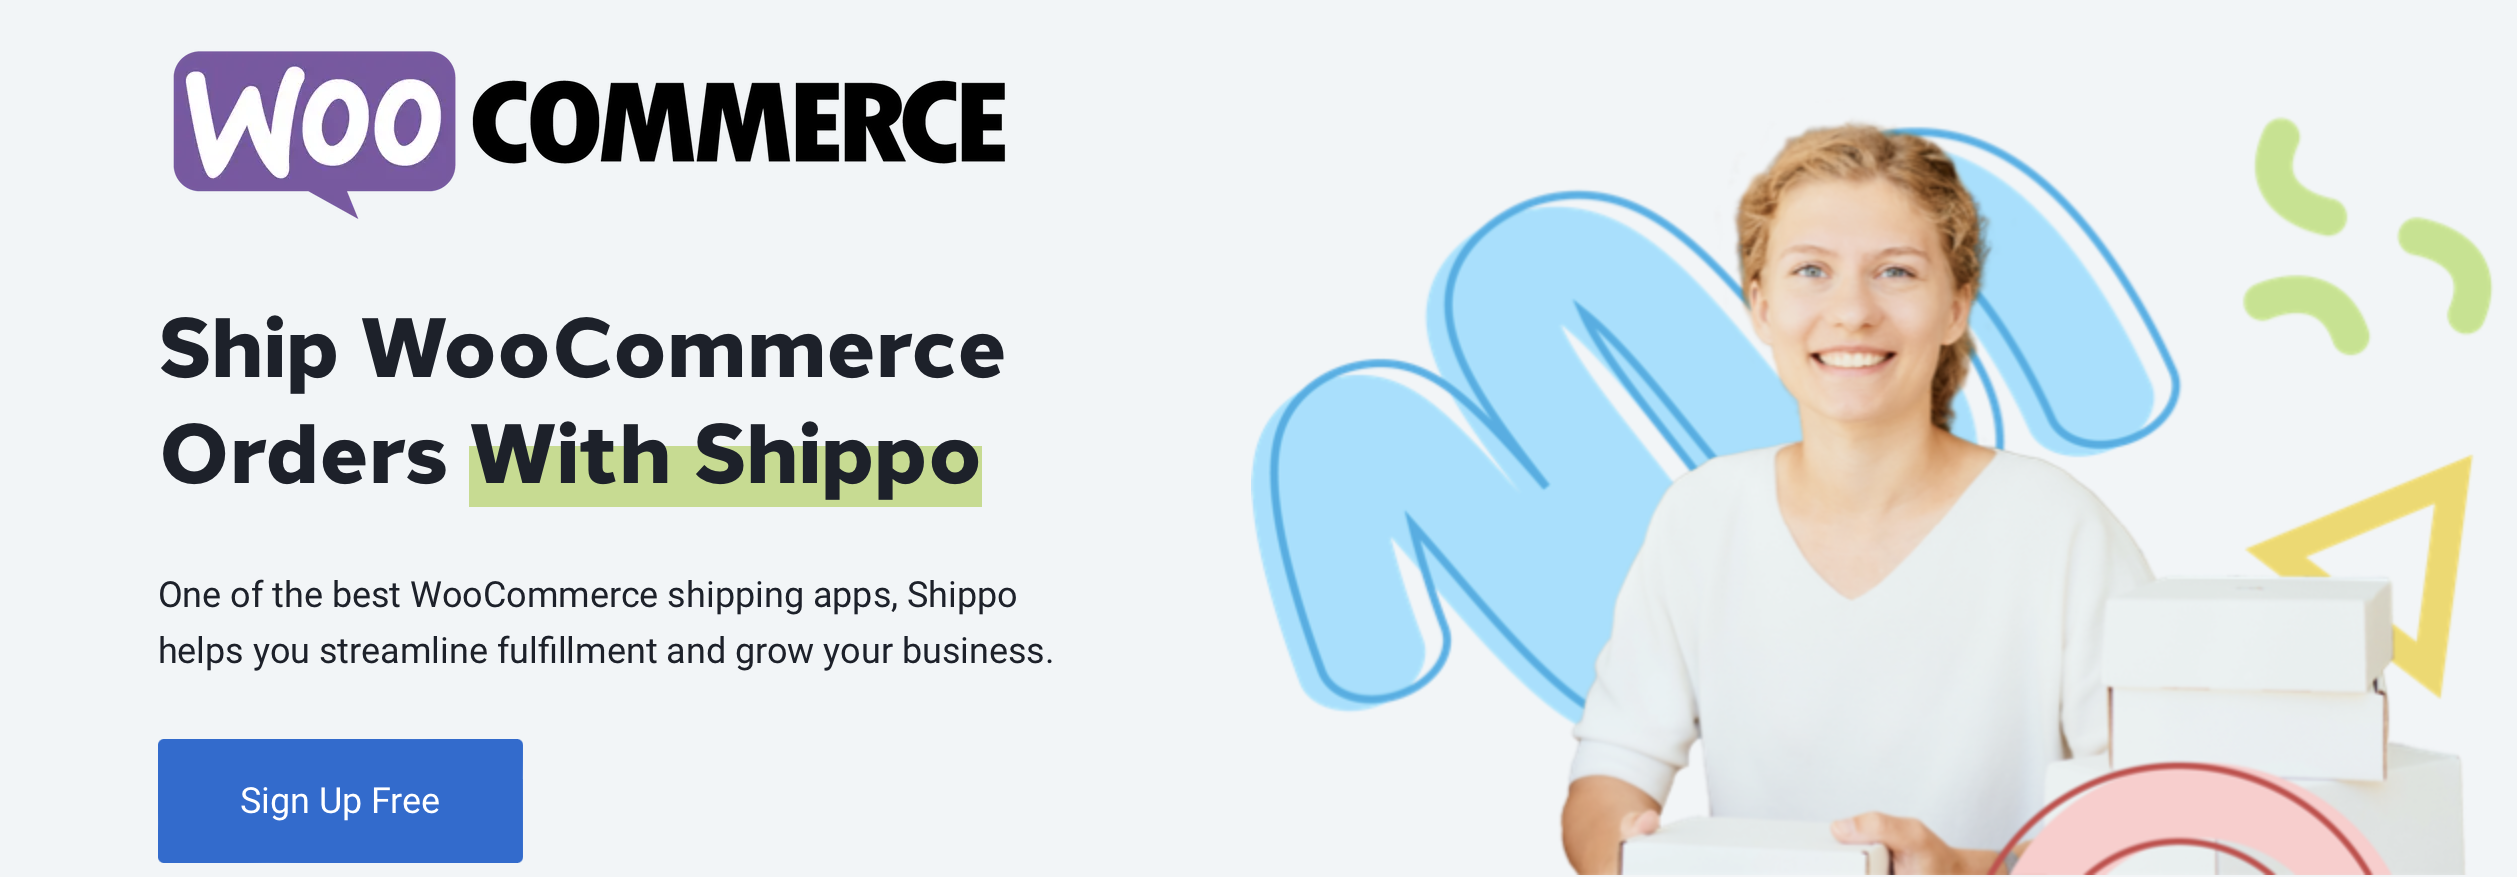 Shippo is one of the best shipping plugins for WooCommerce.